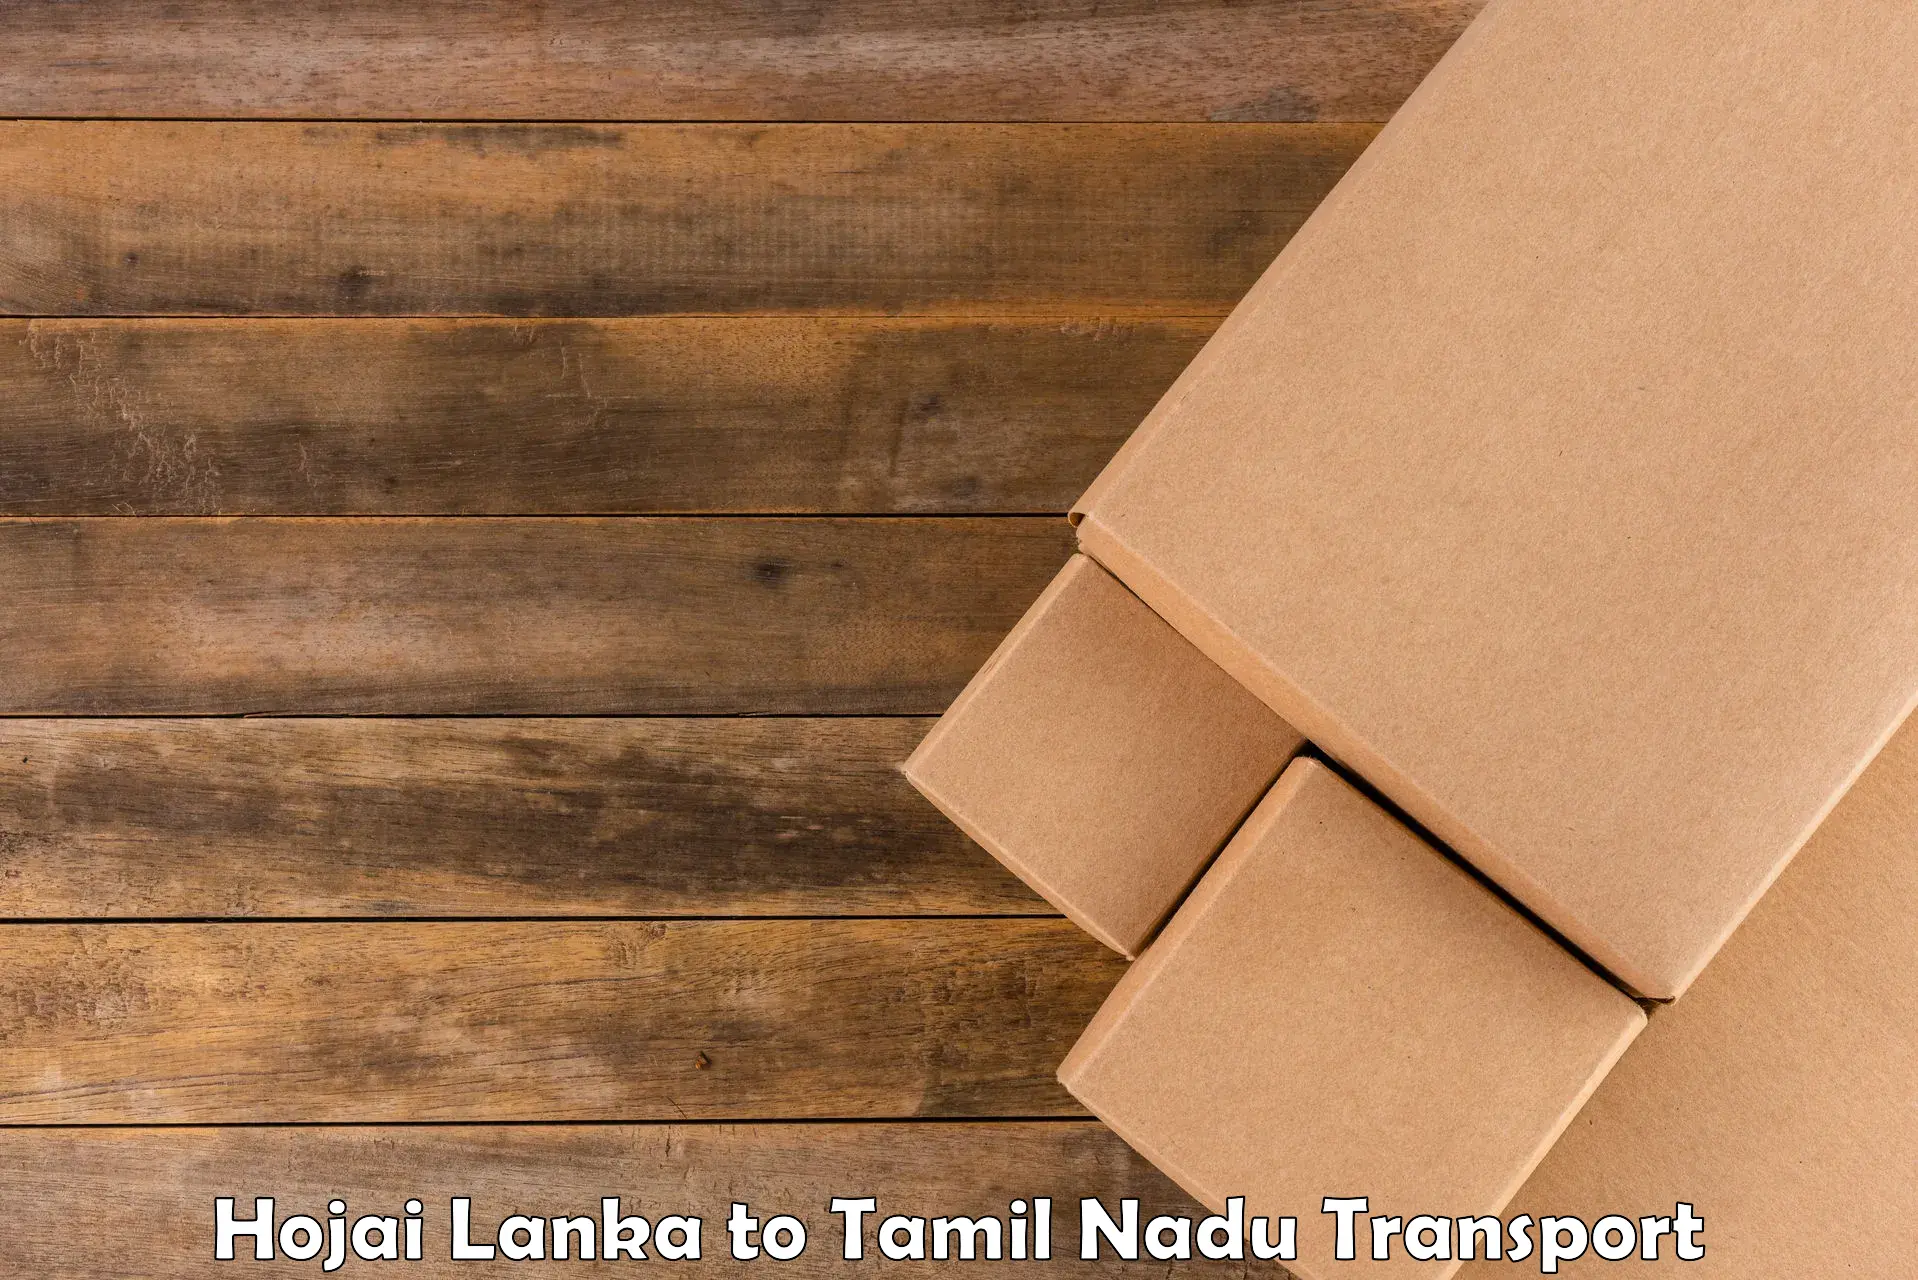 Container transportation services Hojai Lanka to Omalur